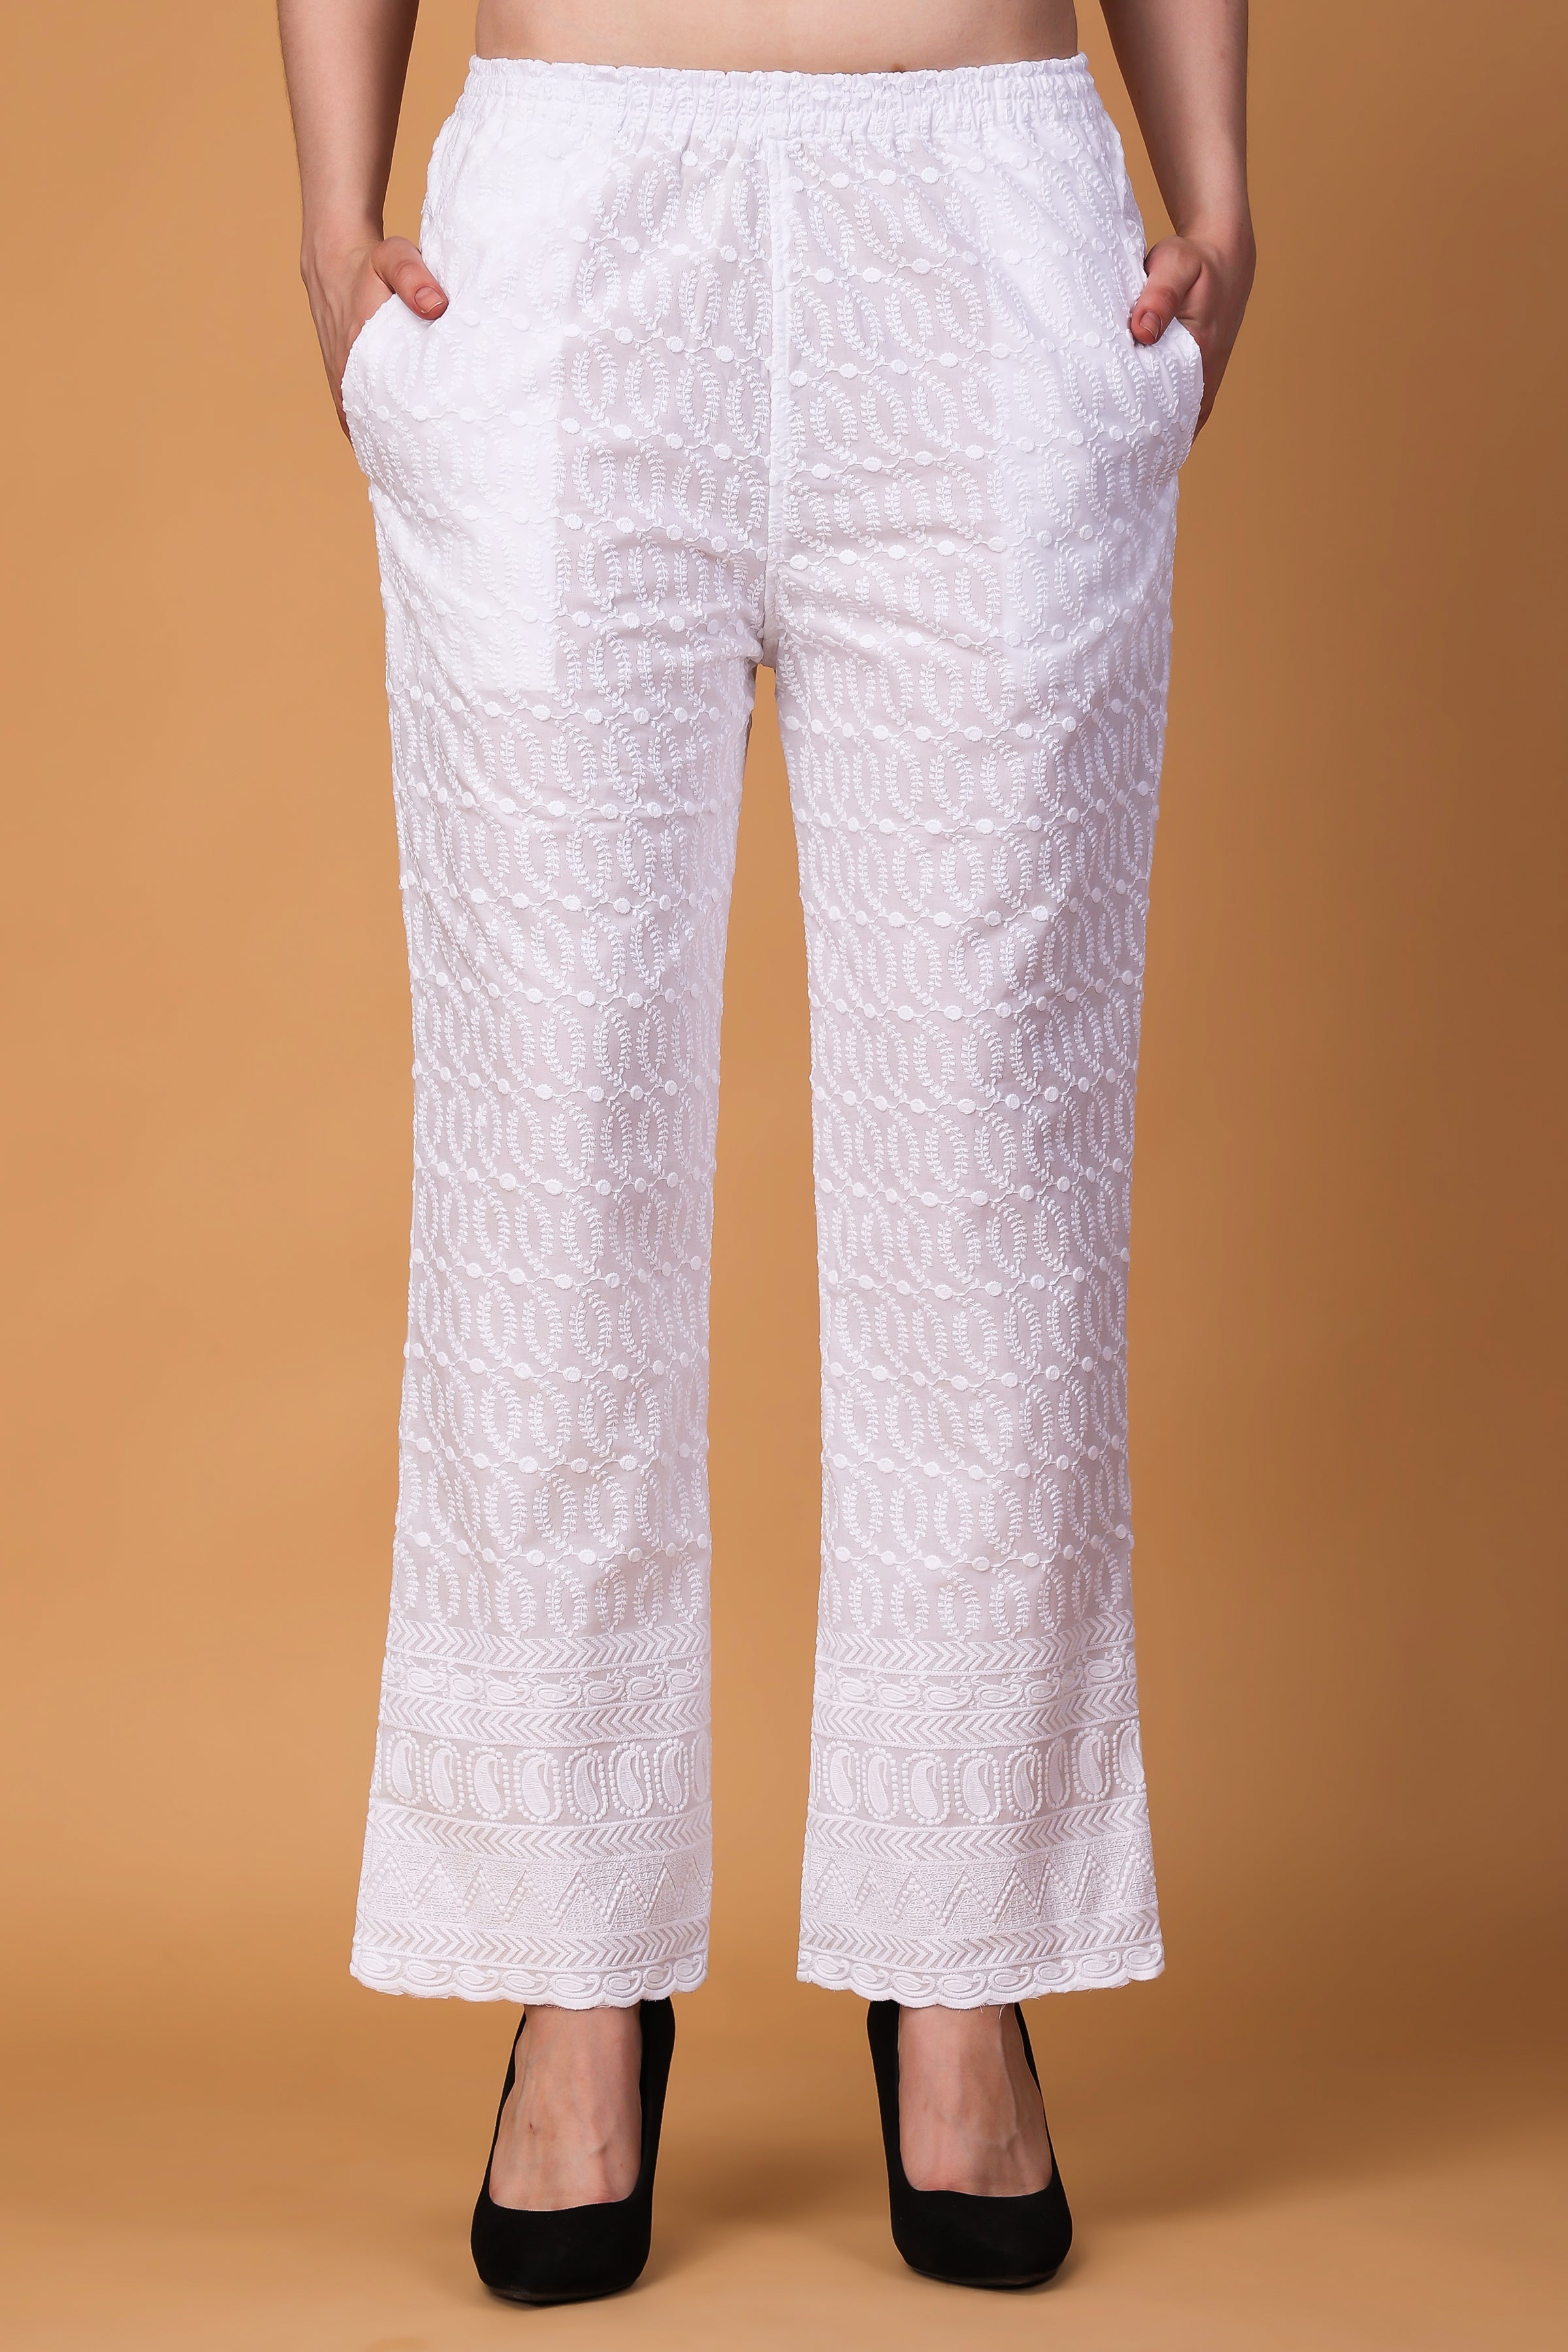 Top Trending White Trouser Outfit Ideas for Women | Libas